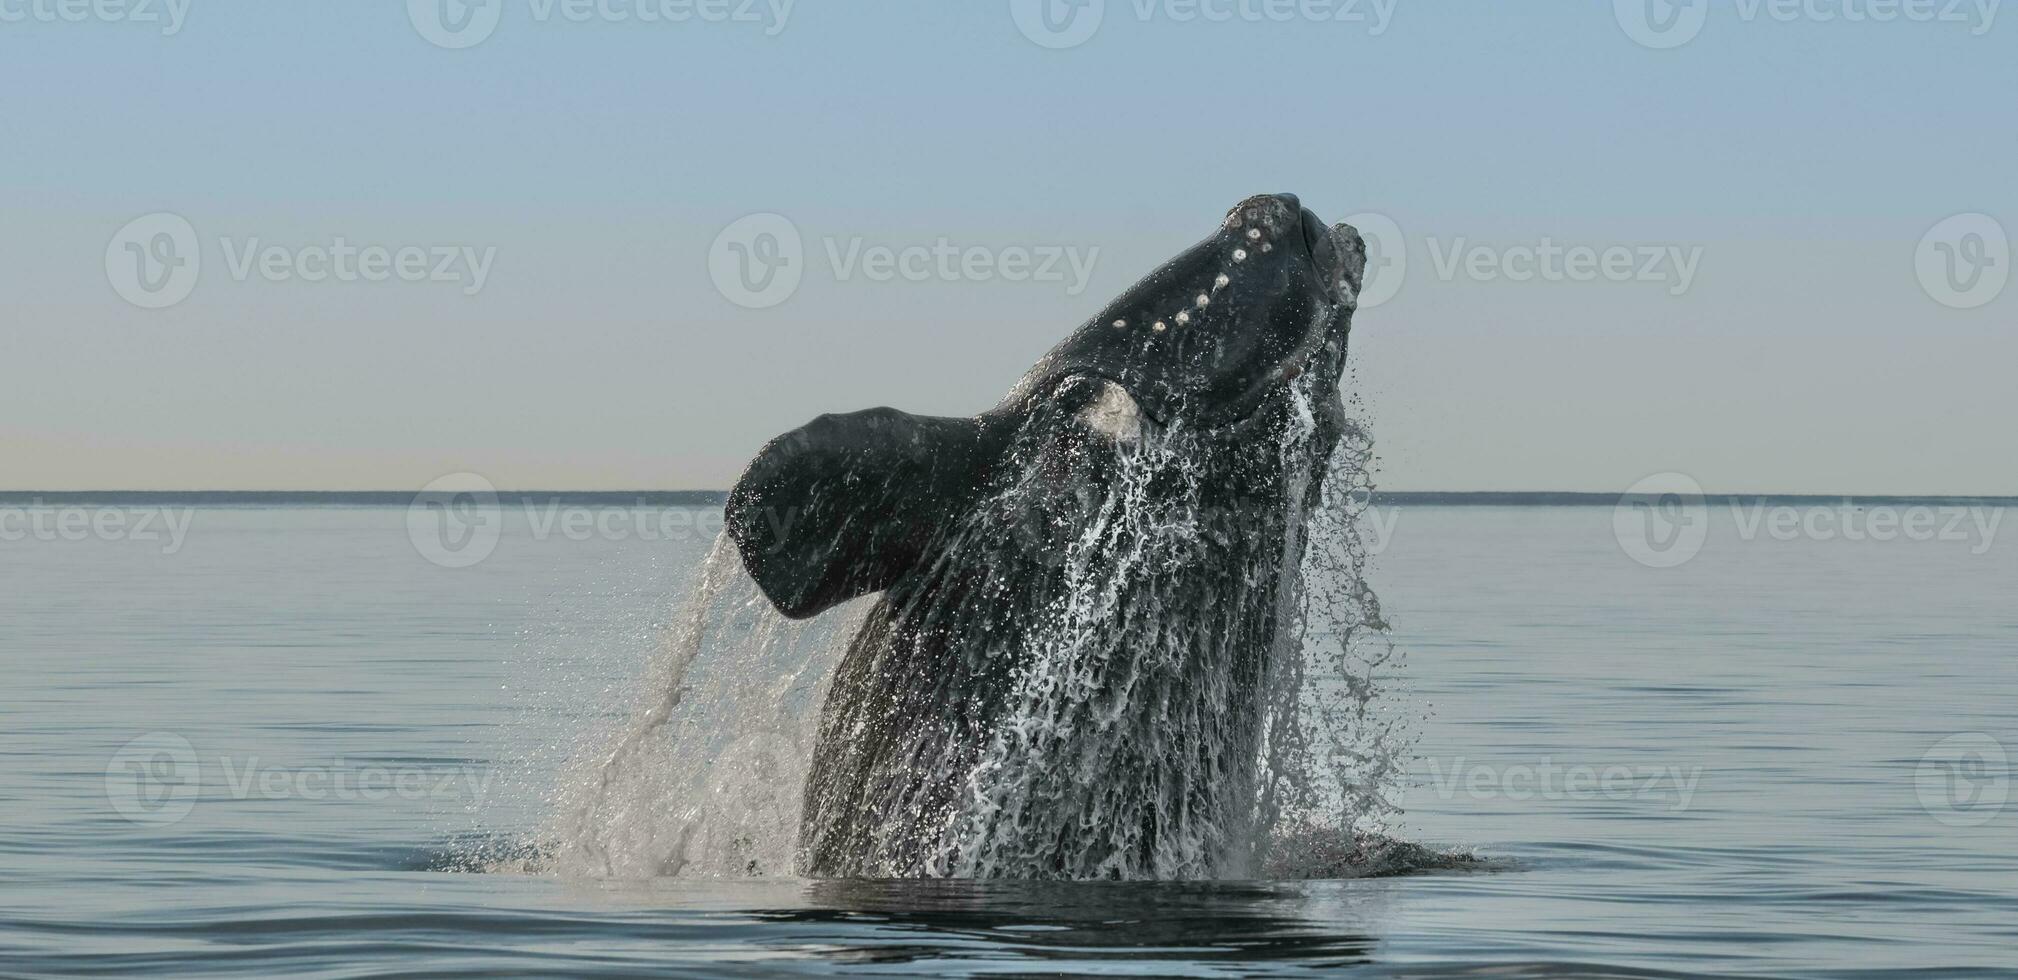 Southern right whale,jumping behavior, Puerto Madryn, Patagonia, Argentina photo